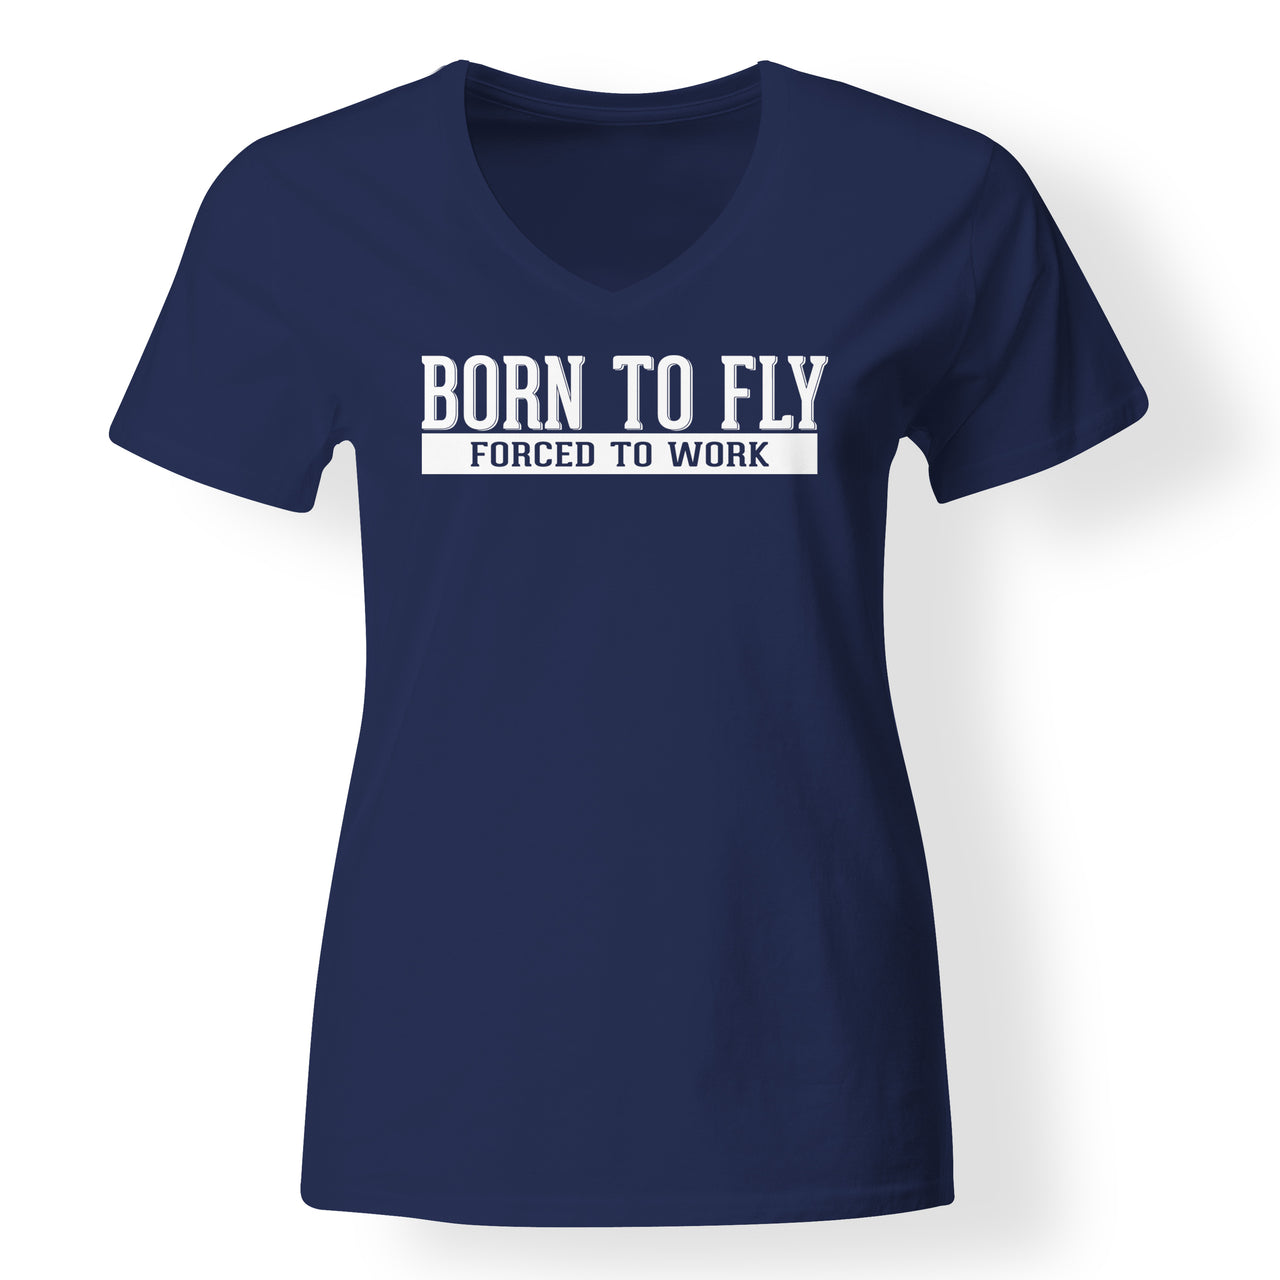 Born To Fly Forced To Work Designed V-Neck T-Shirts